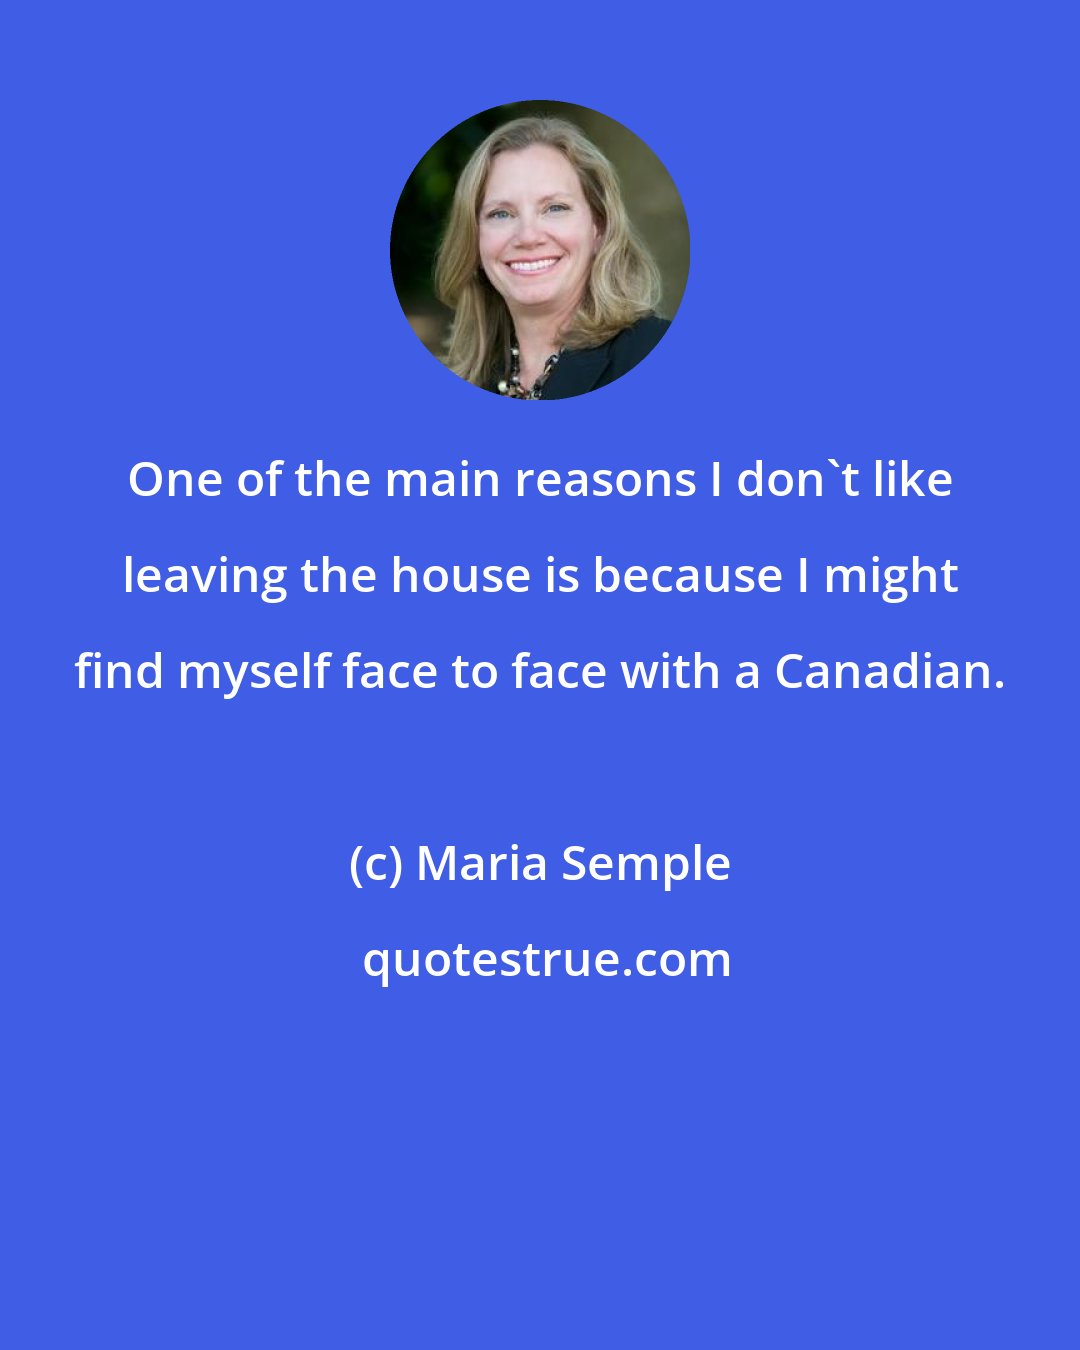 Maria Semple: One of the main reasons I don't like leaving the house is because I might find myself face to face with a Canadian.